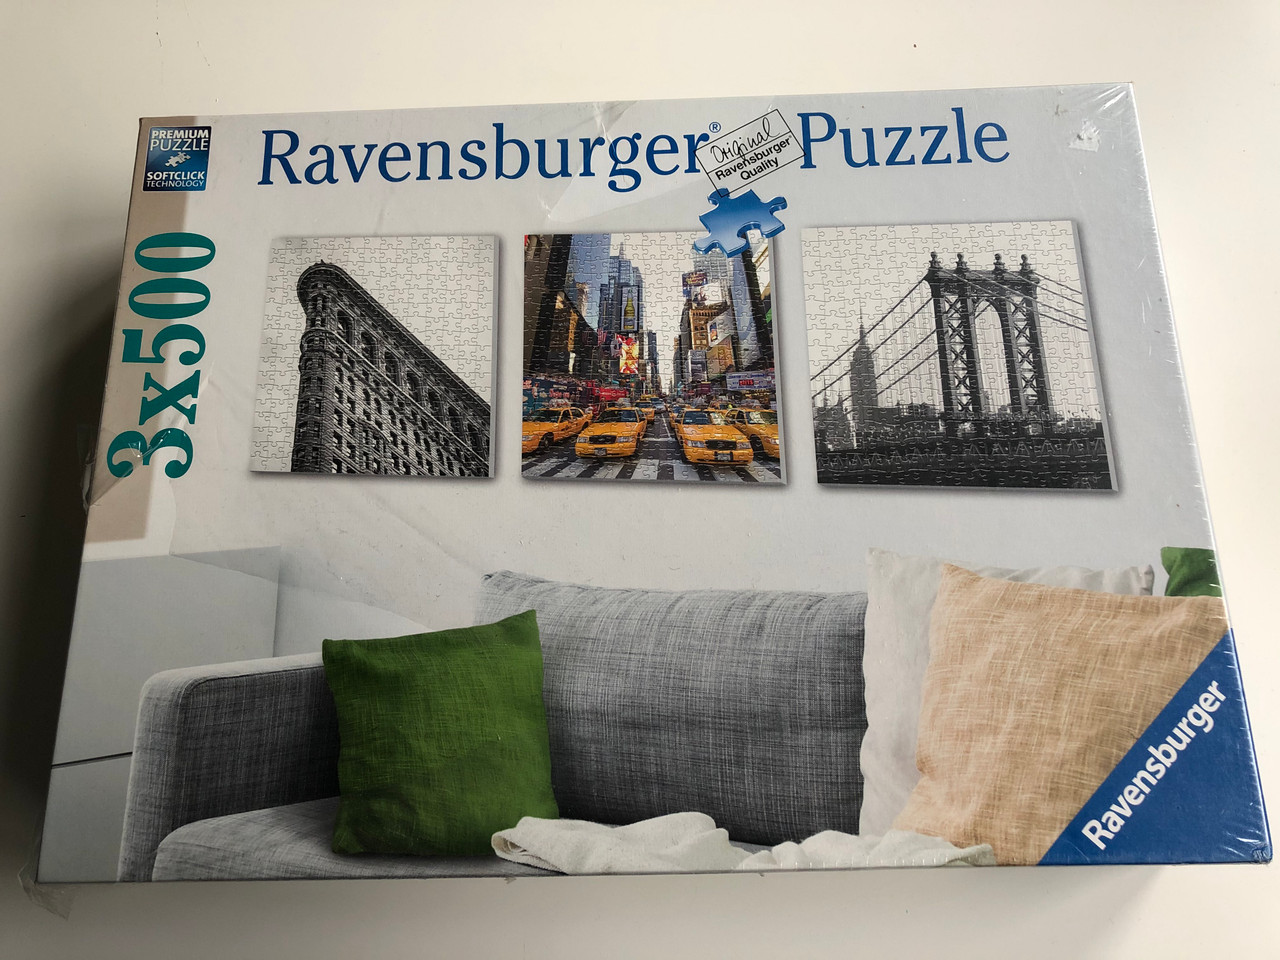 Required Agent Print Ravensburger Puzzle 19923 - 3x500 / Wall decorations times three - New York  City Impressions / Premium Puzzle - Softclick technology / 3 bags of 500  pieces, poster - bibleinmylanguage